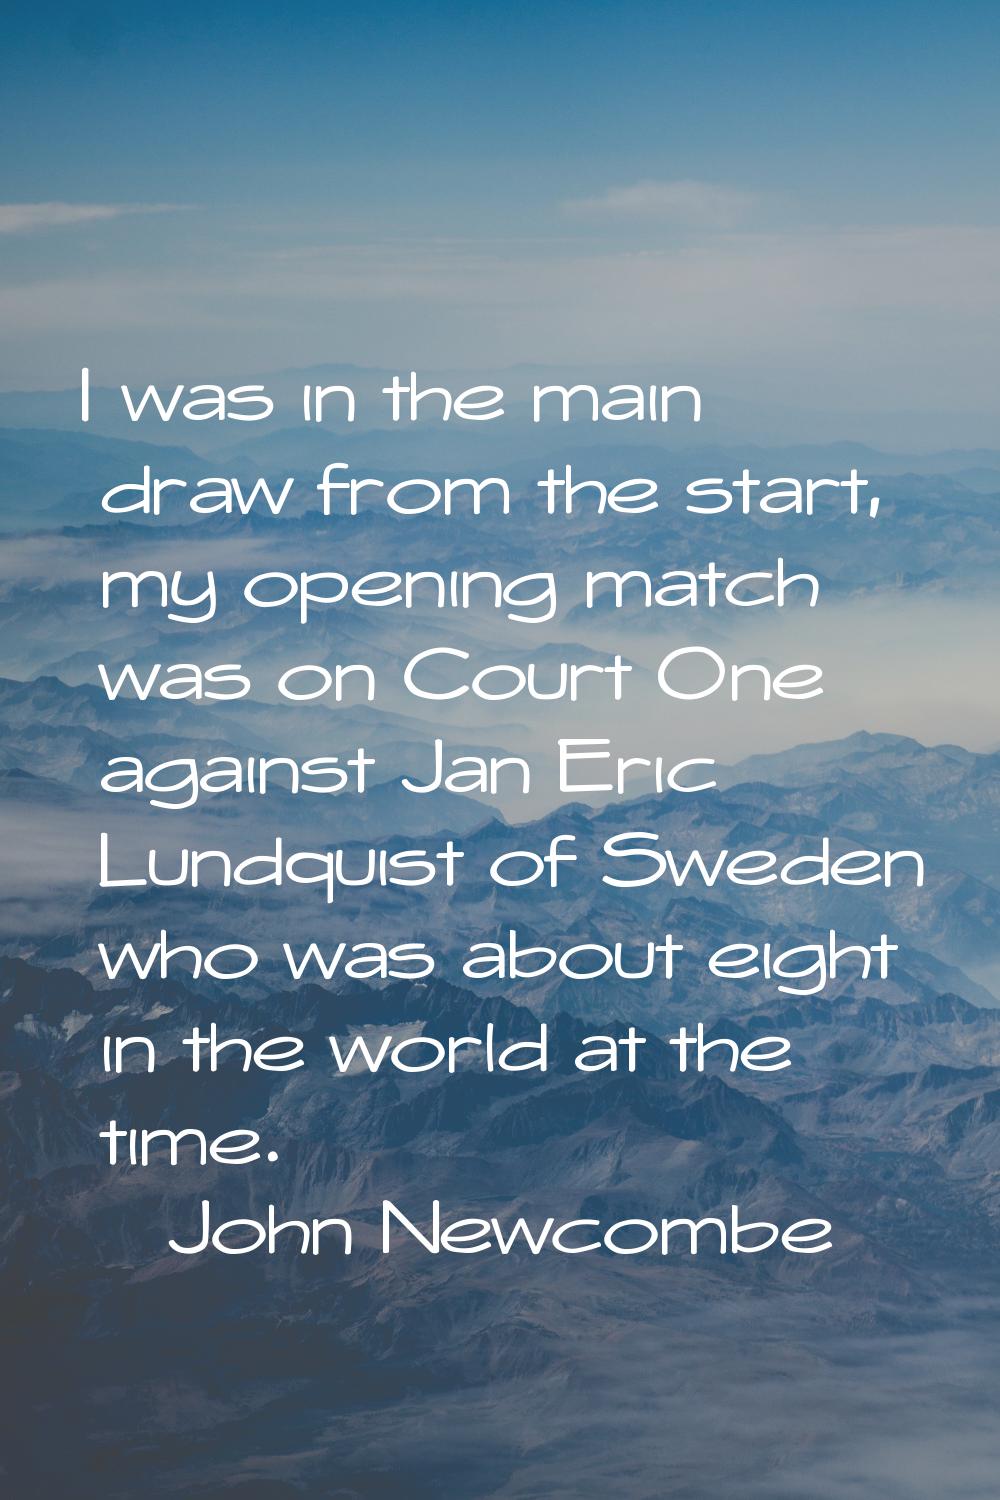 I was in the main draw from the start, my opening match was on Court One against Jan Eric Lundquist